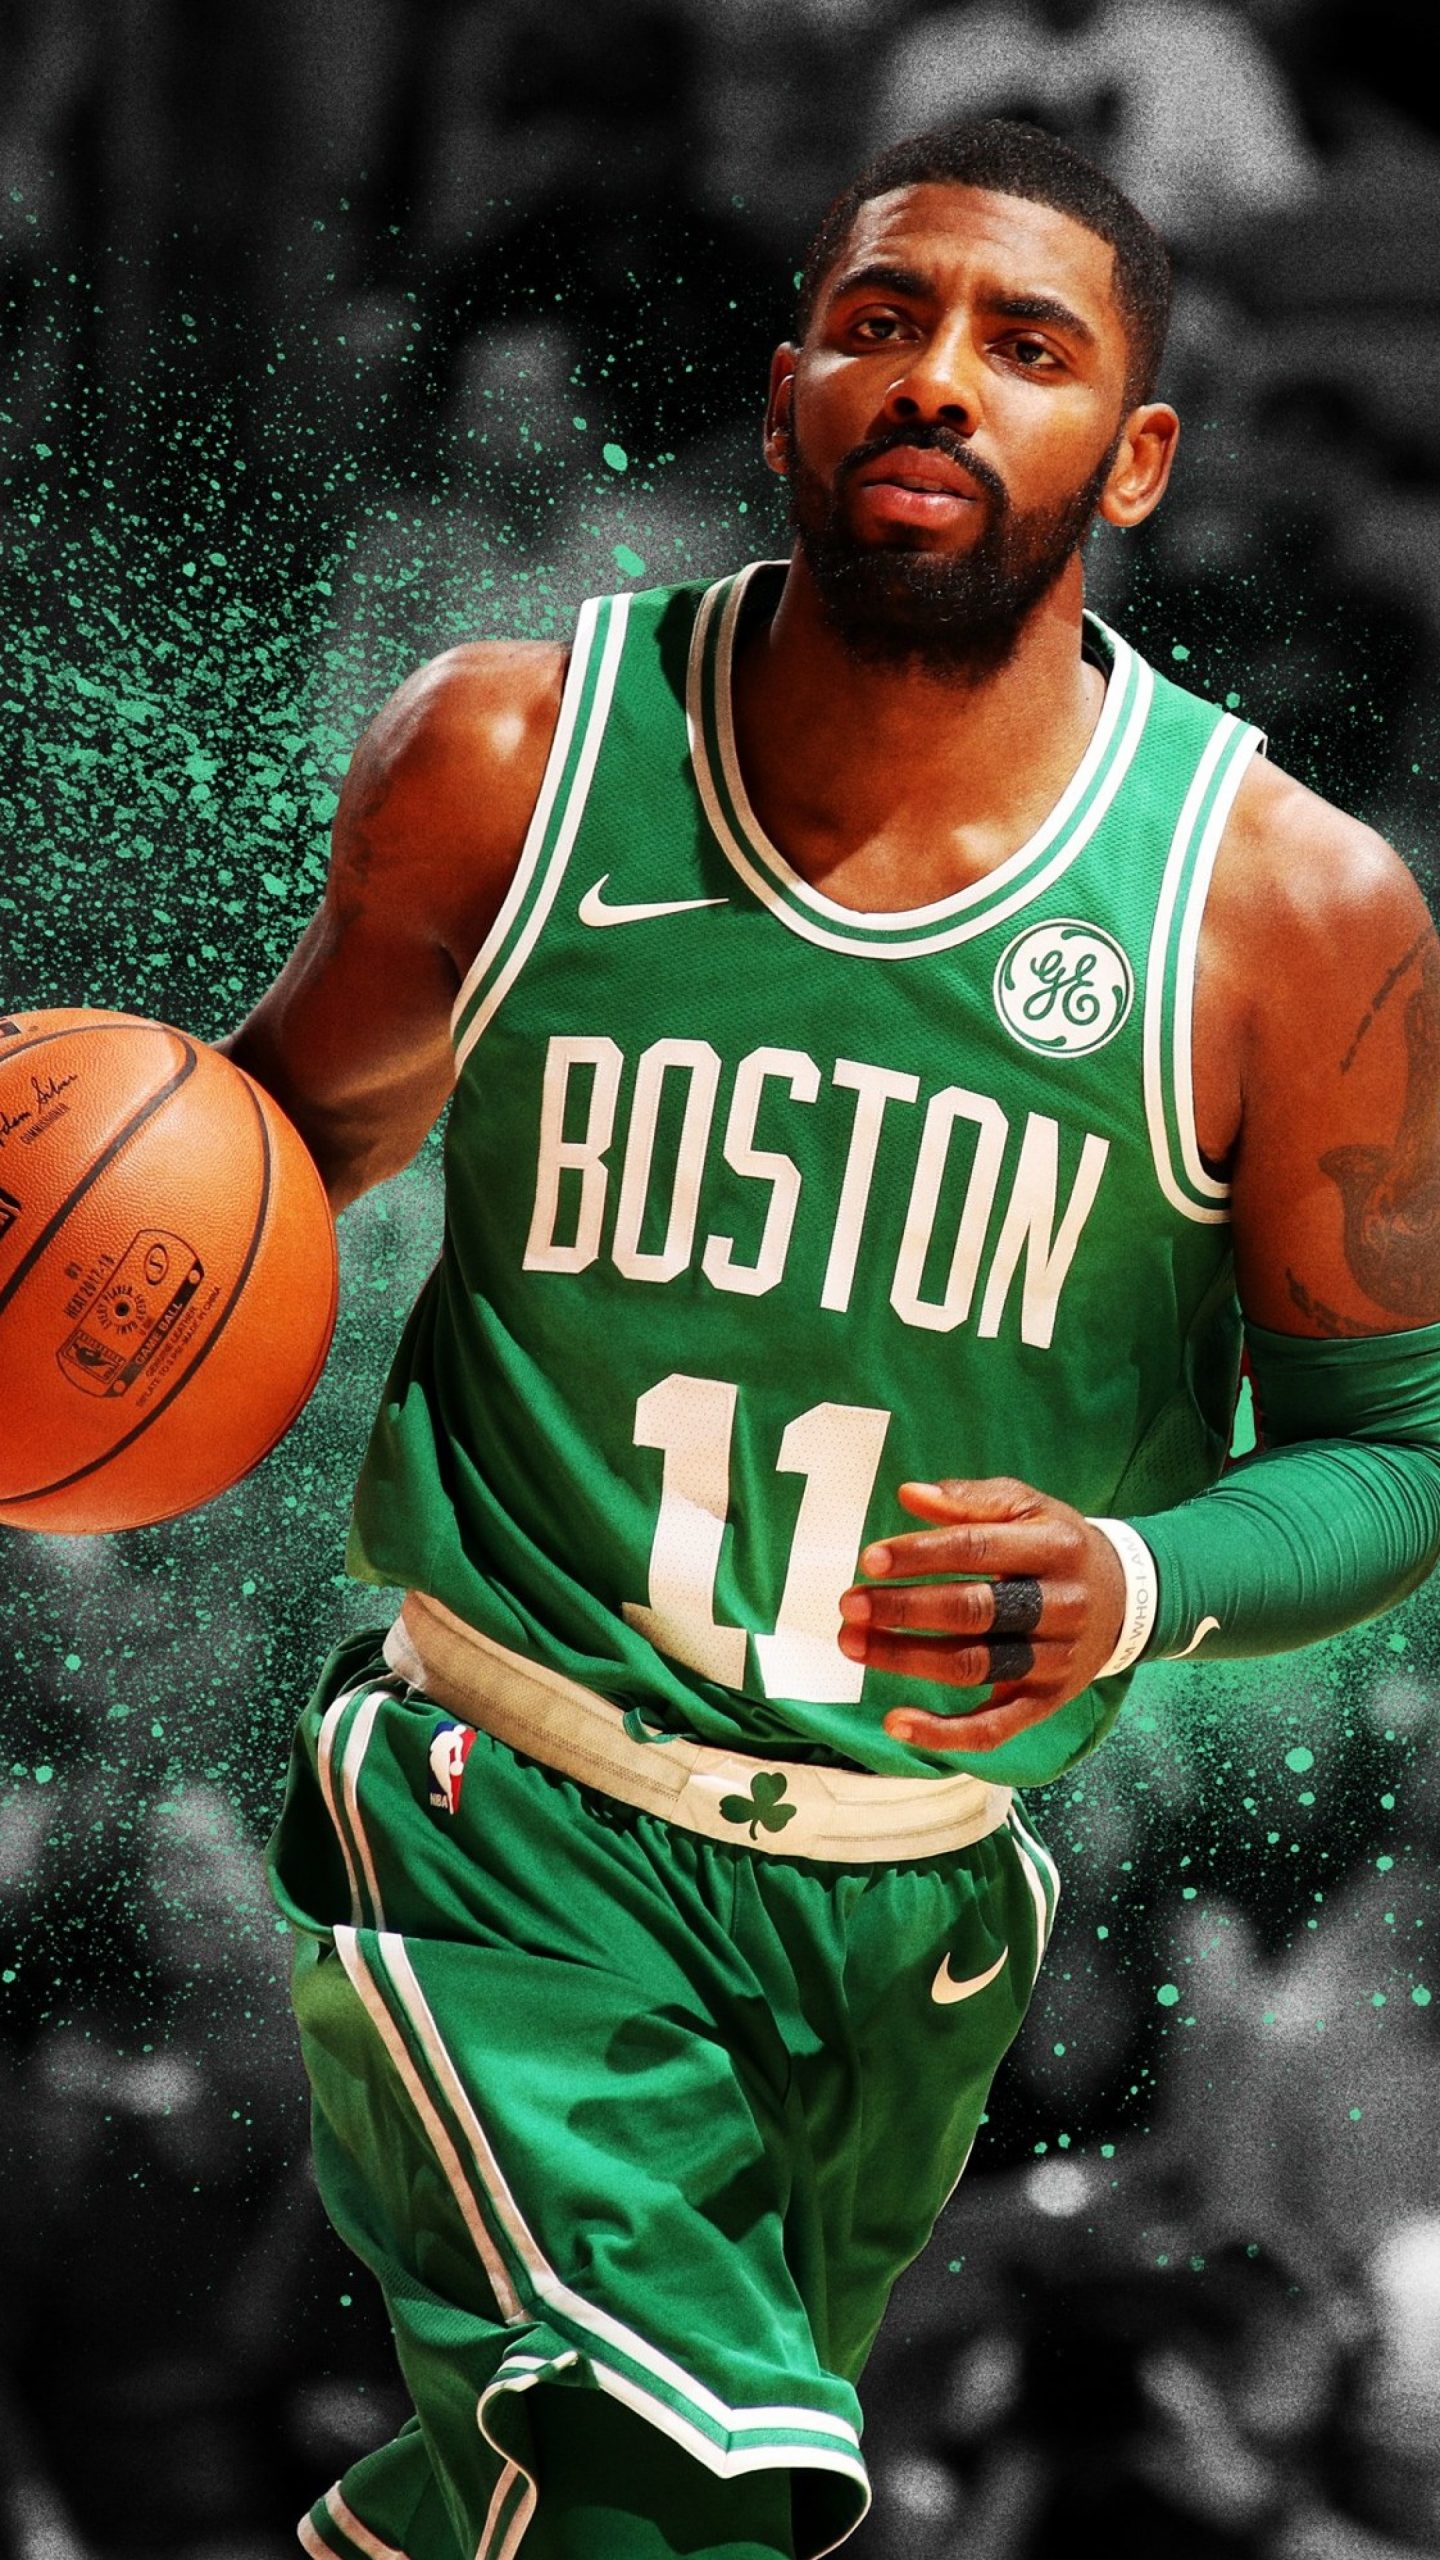 HD kyrie irving wallpapers